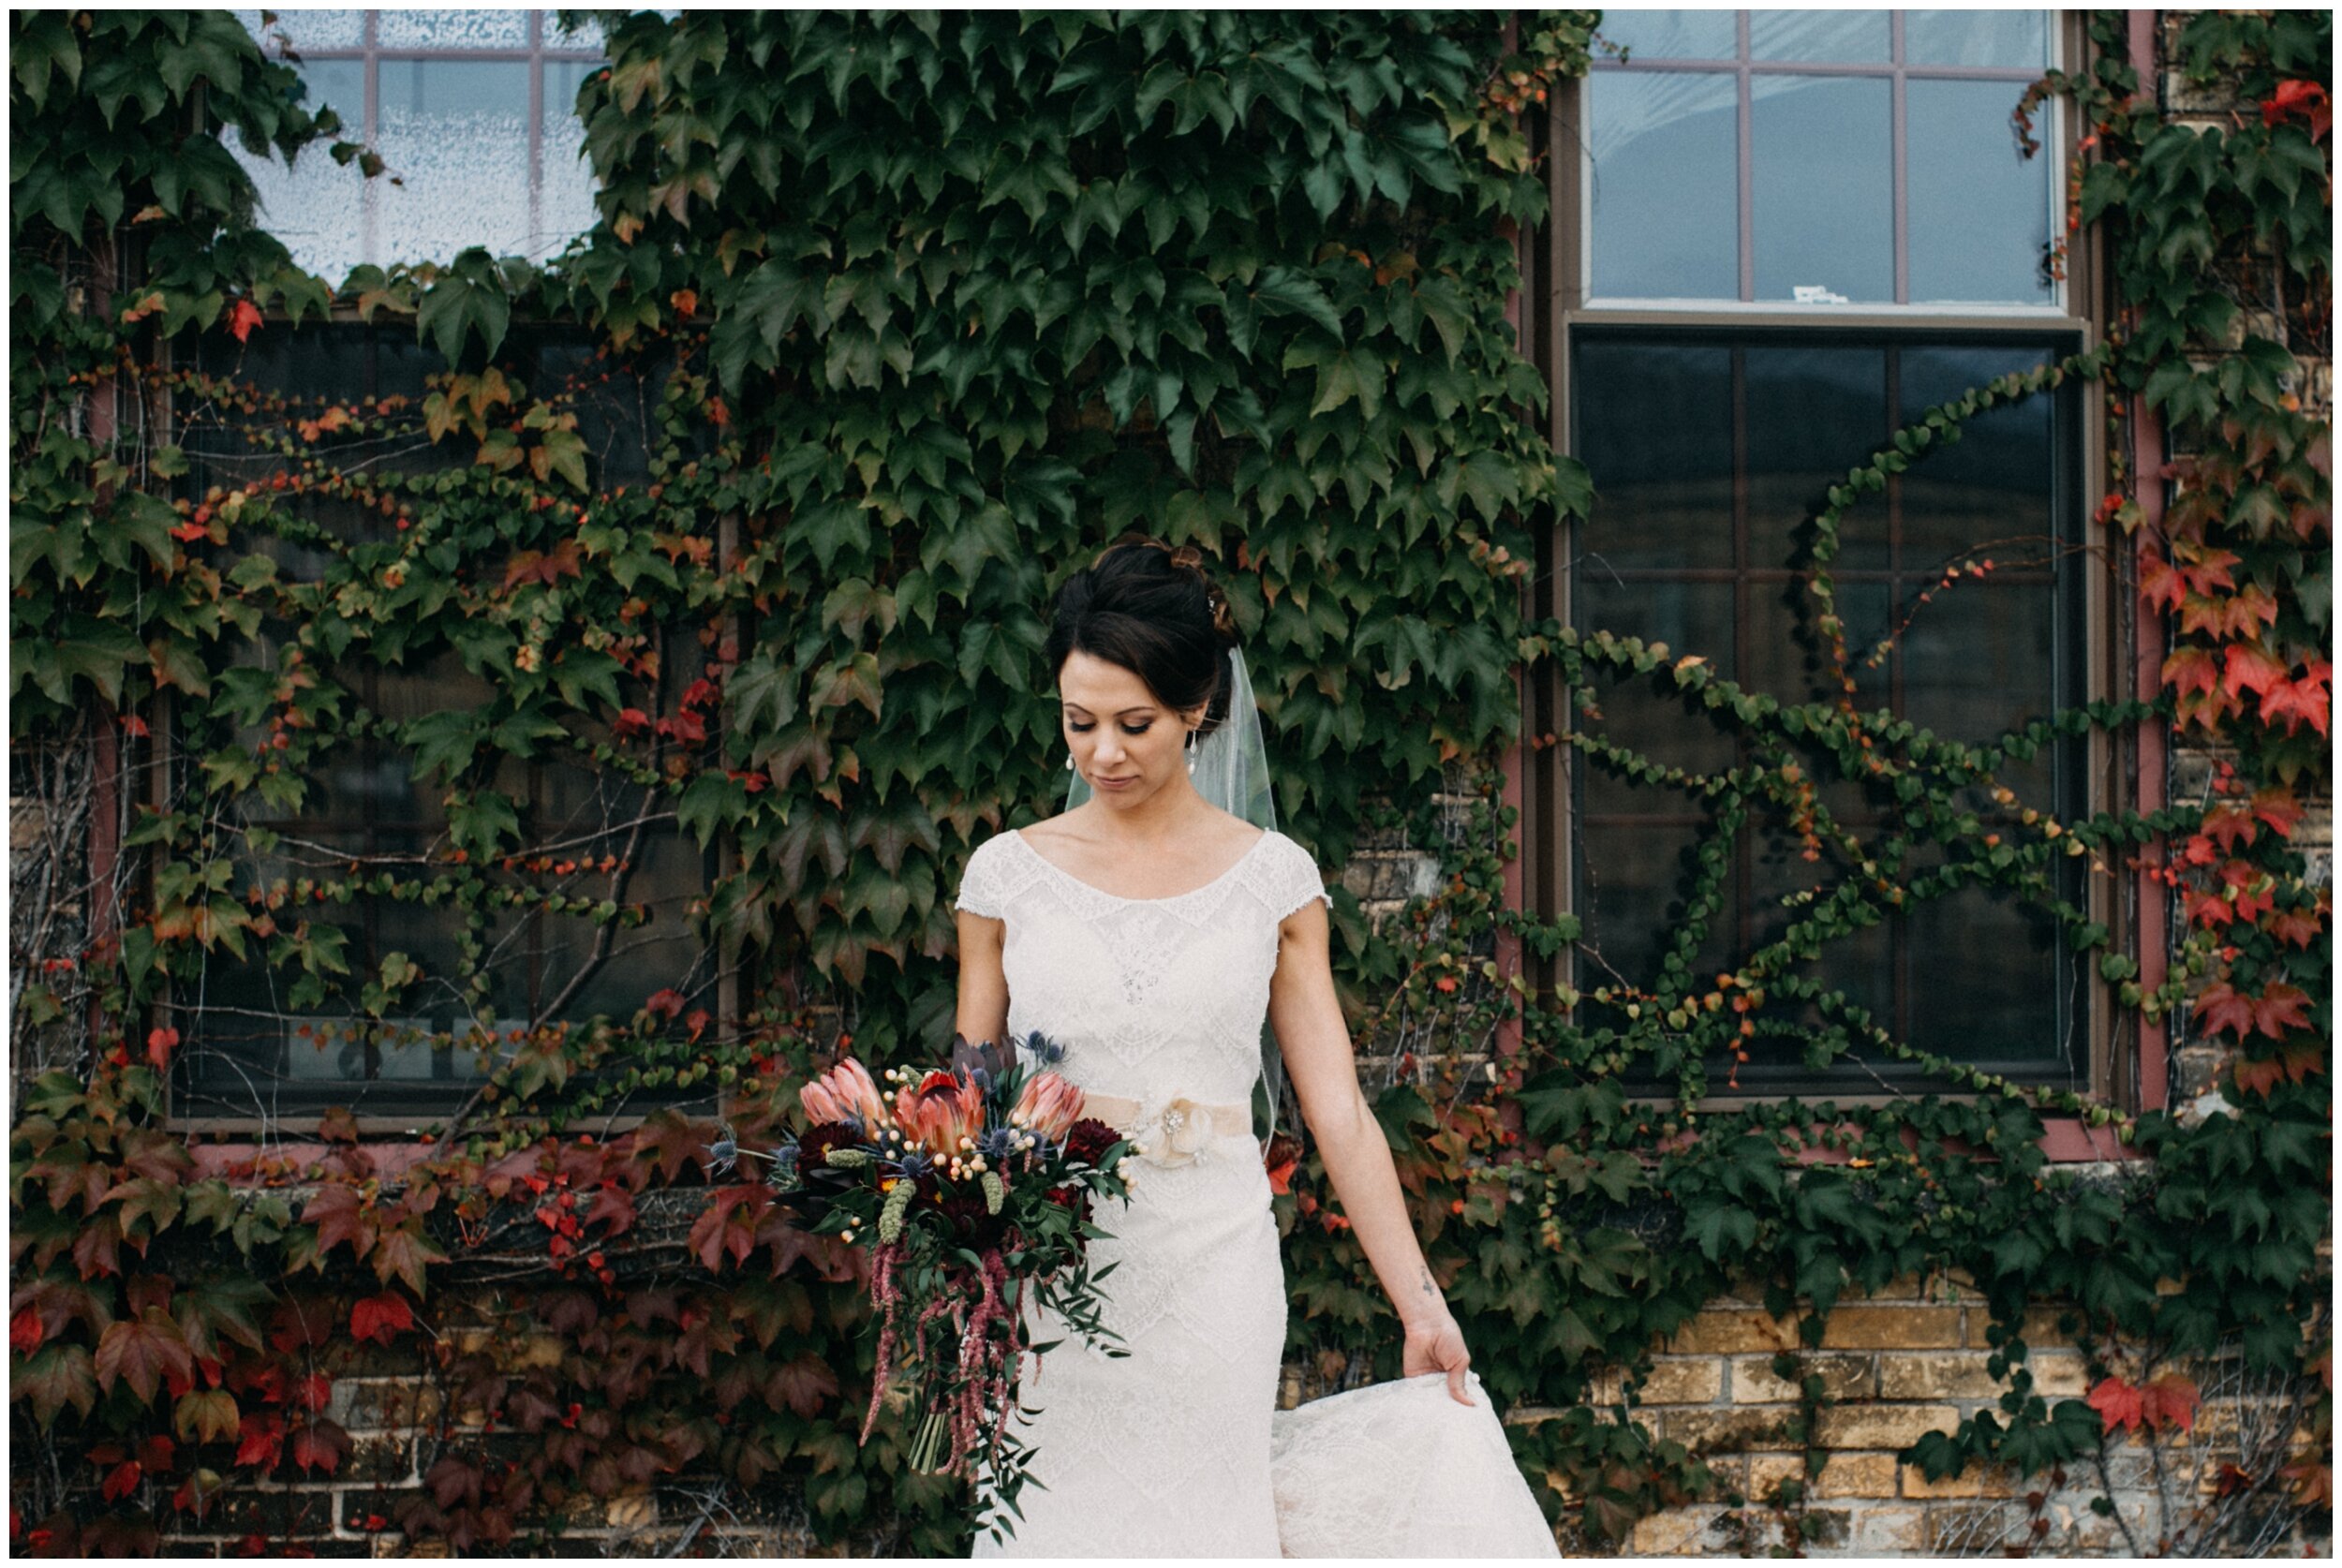 Bride looking at wedding bouquet while standing in front of ivy, covered brick wall at the Northern Pacific Center in Brainerd, MN